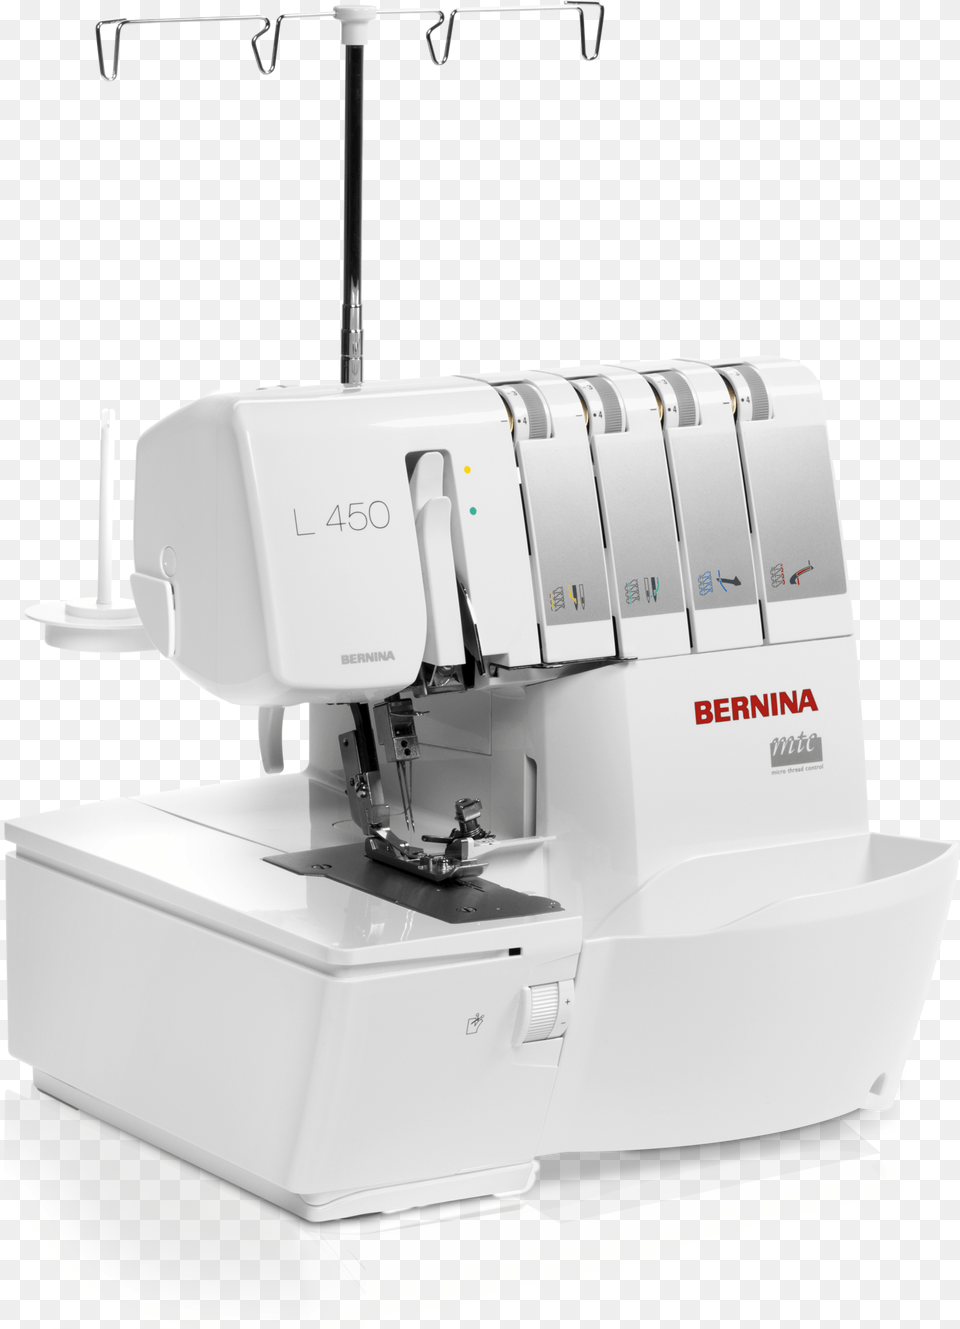 Bernina, Machine, Device, Appliance, Electrical Device Png Image